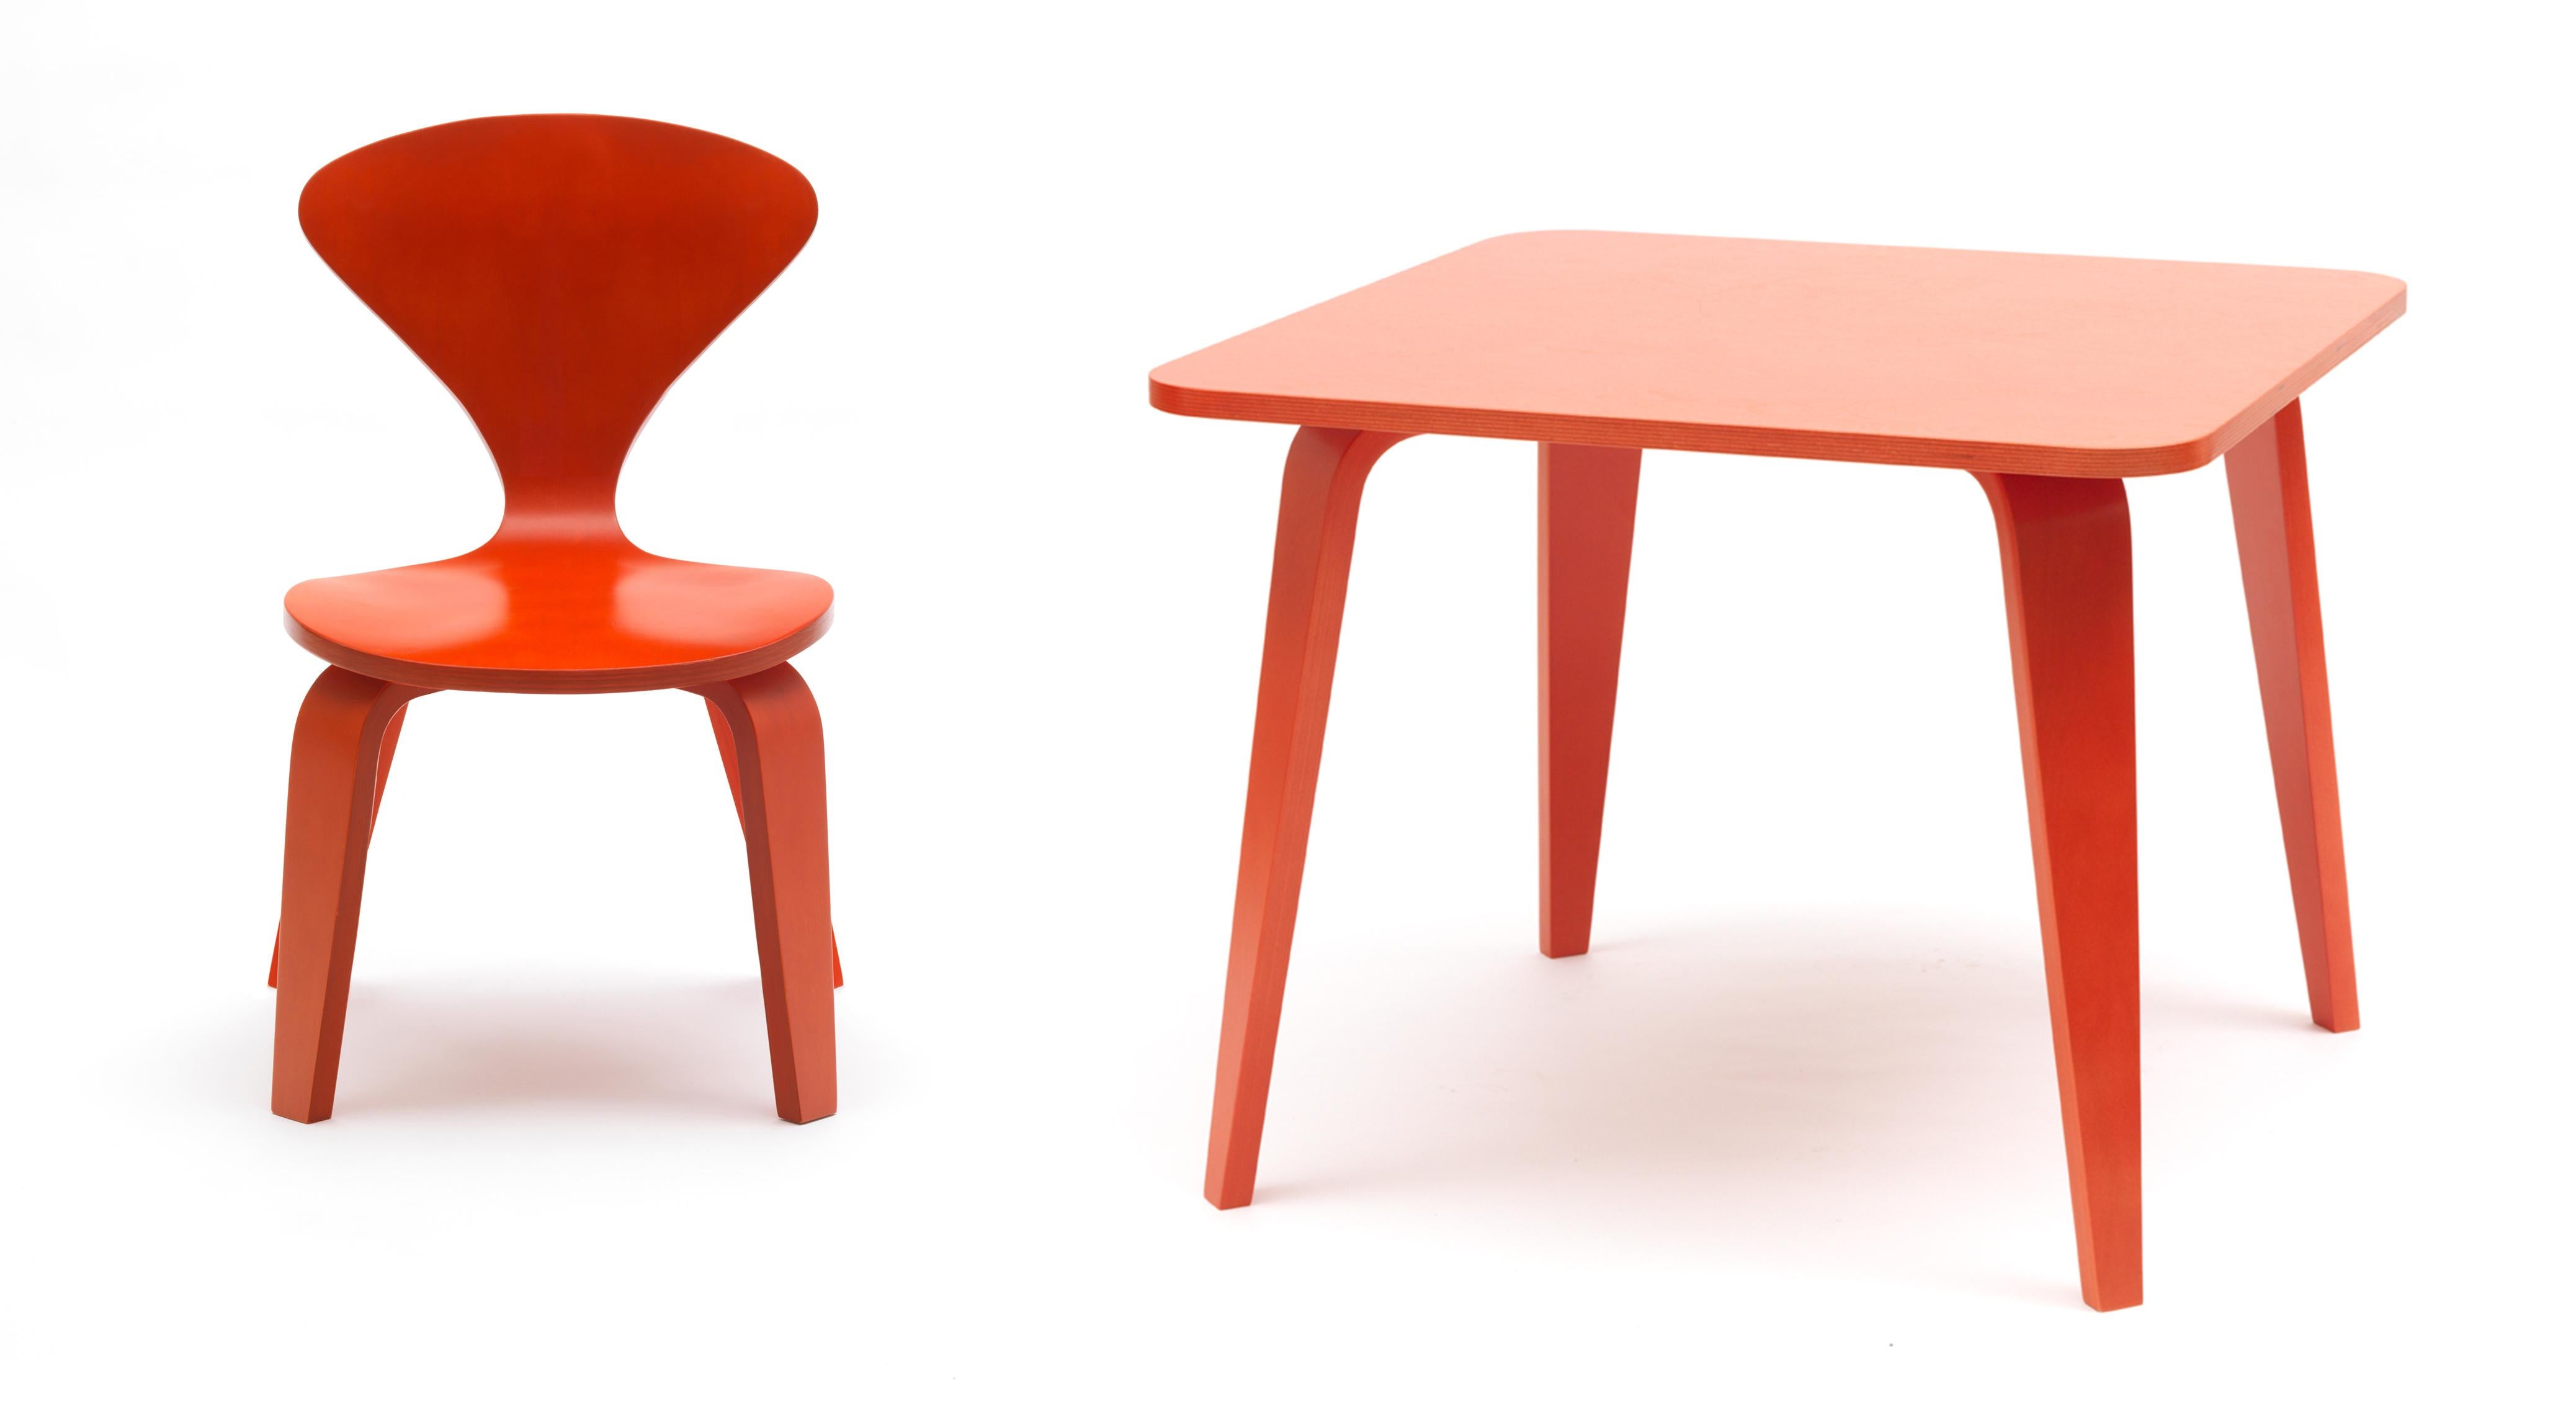 Molded Cherner Child Chair by Benjamin Cherner in Orange, Contemporary, USA, 2007 For Sale